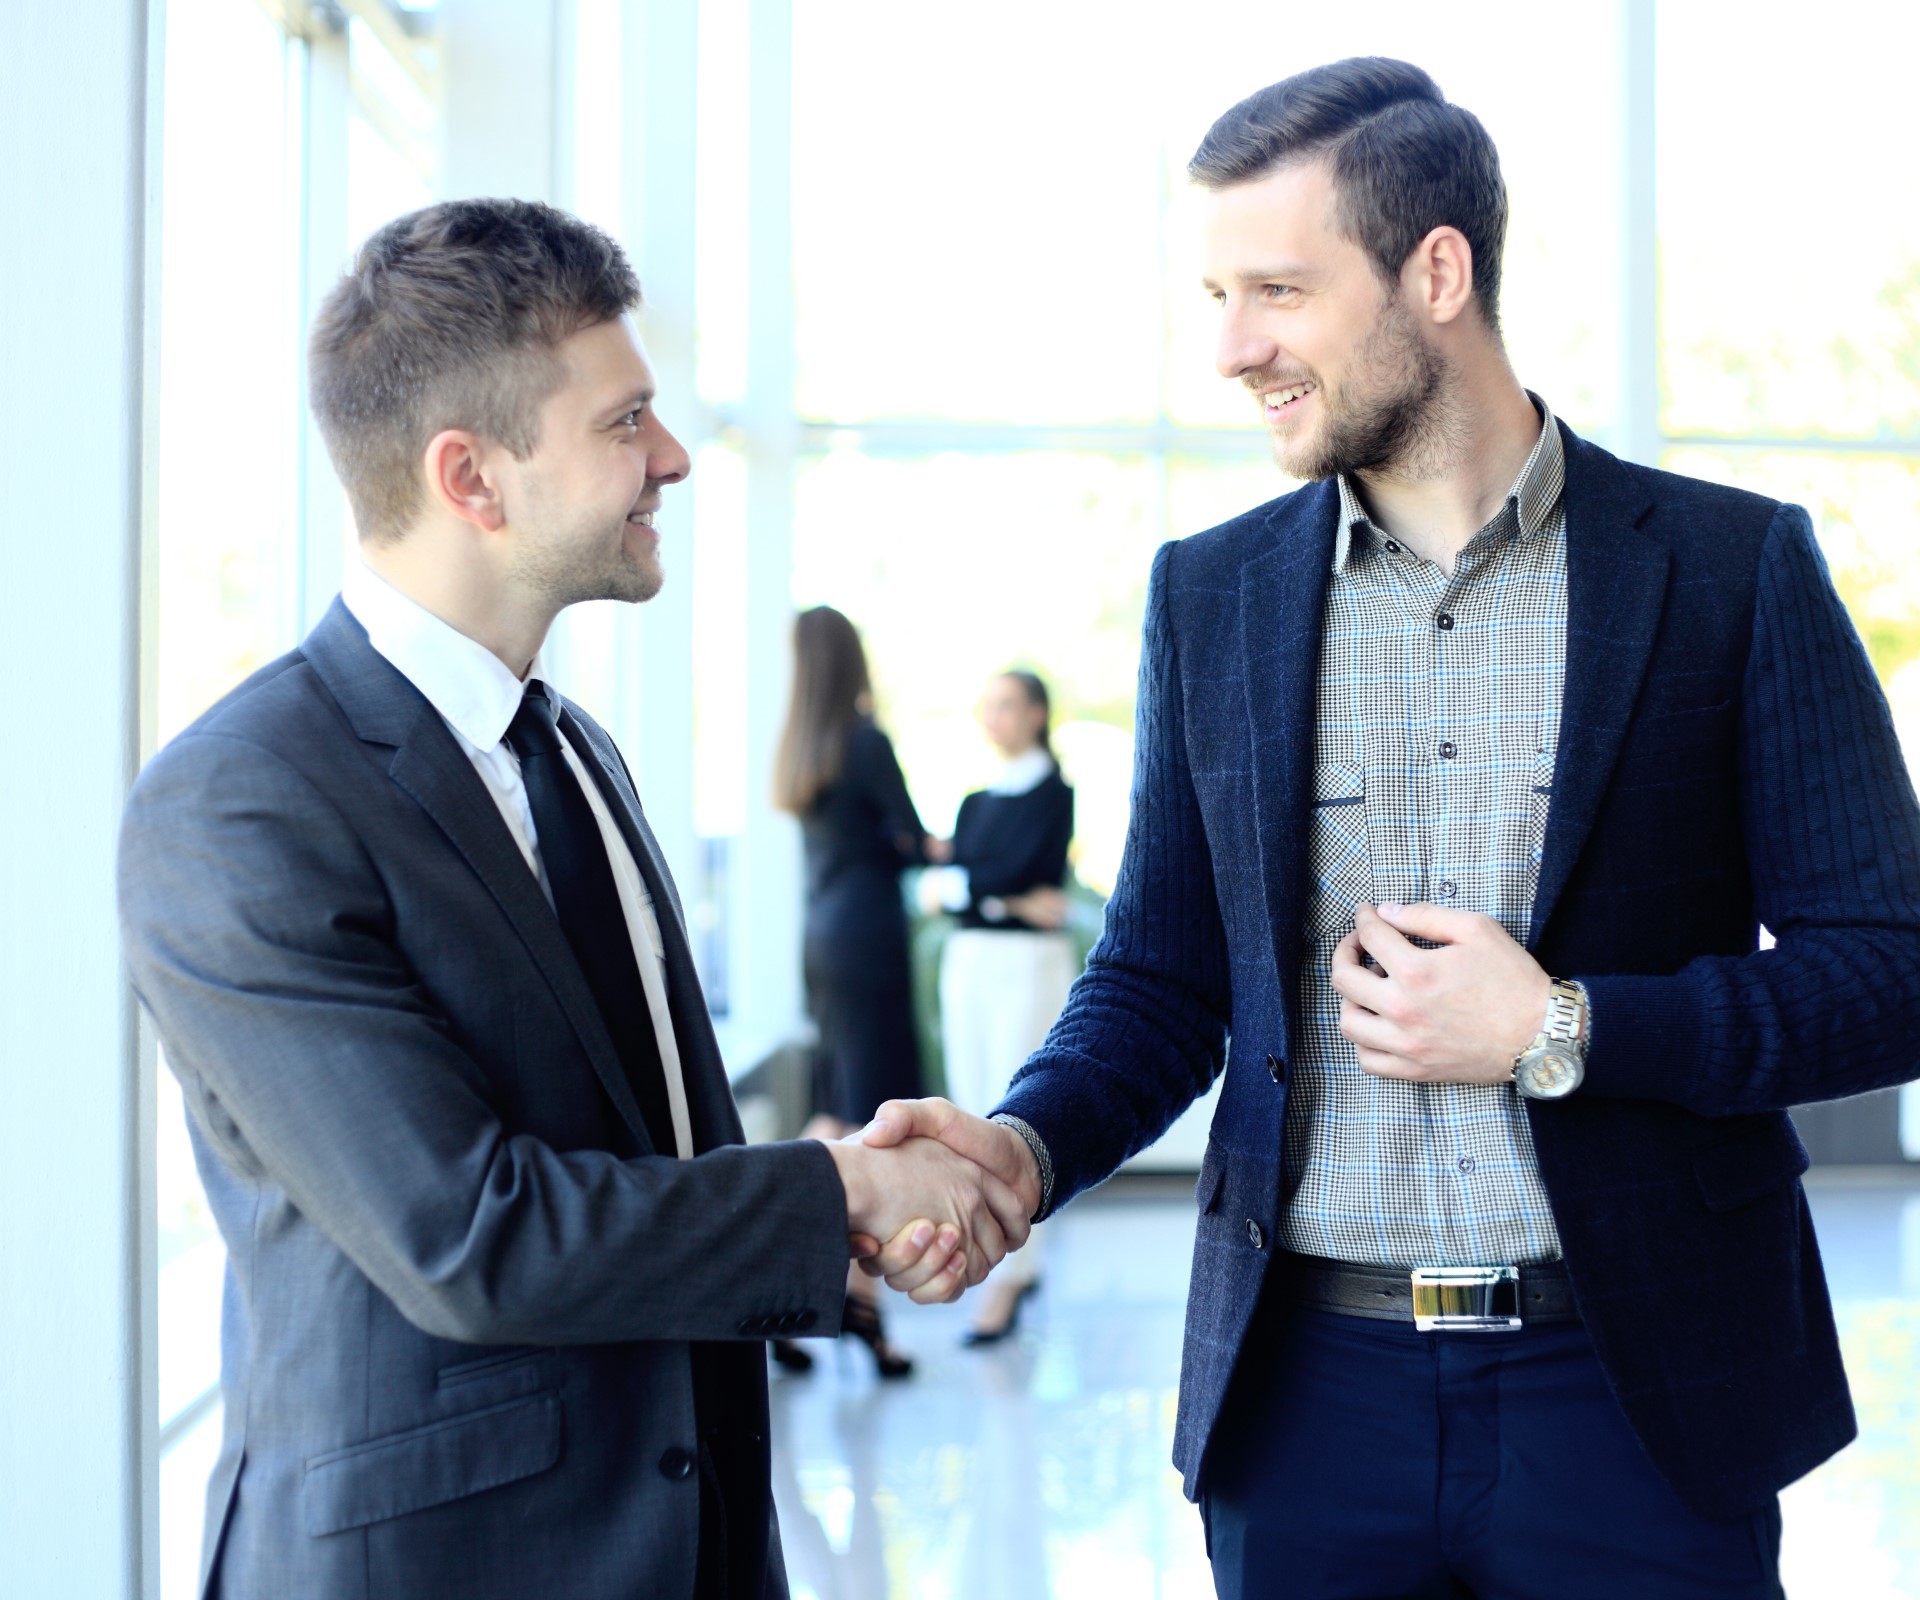 businesss and office concept - two businessmen shaking hands in